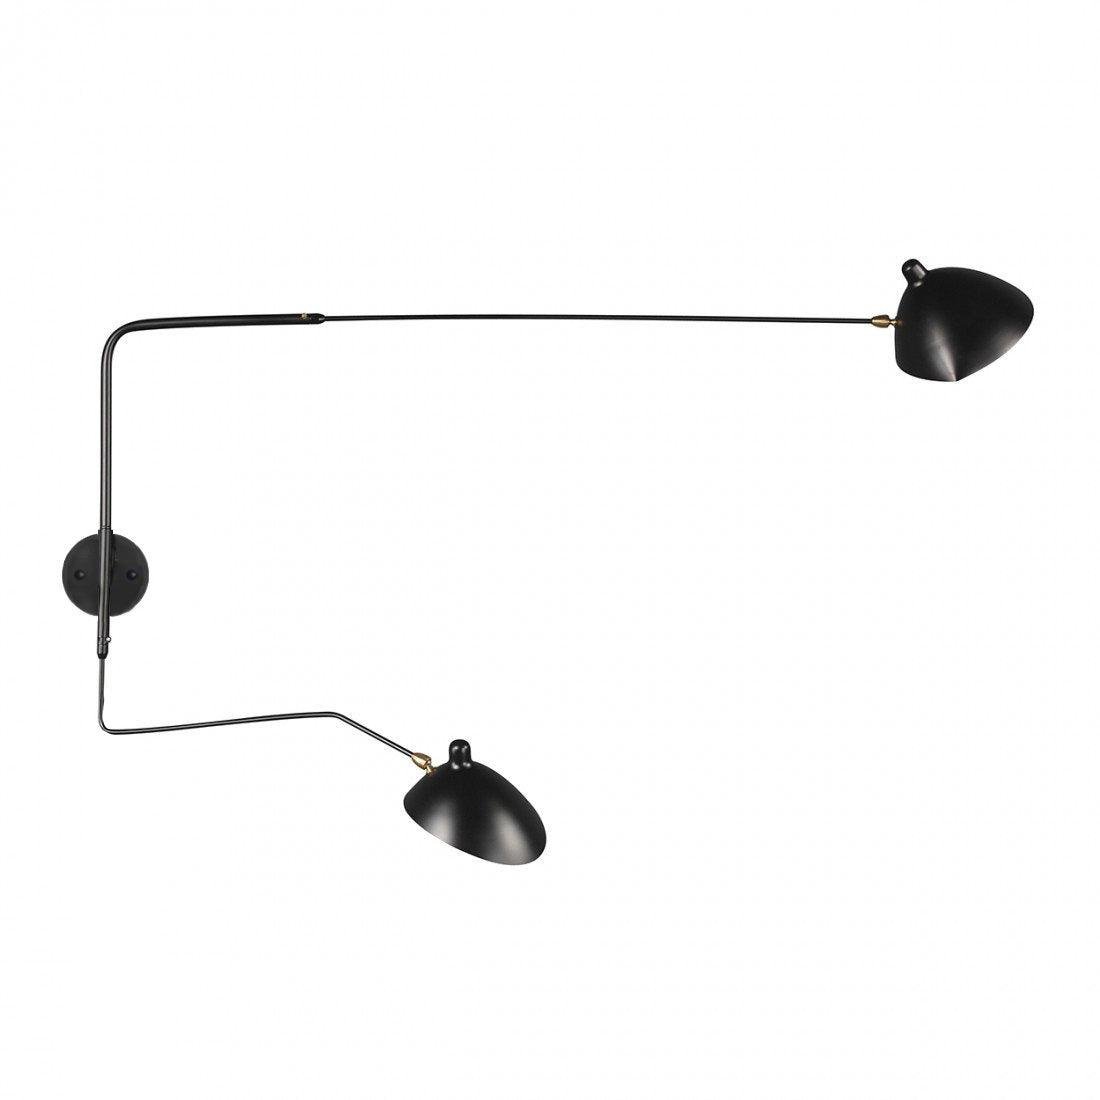 Black Serge Mouille Wall Sconce with 2 Heads and Dia 140cm, Hard Wire Connection